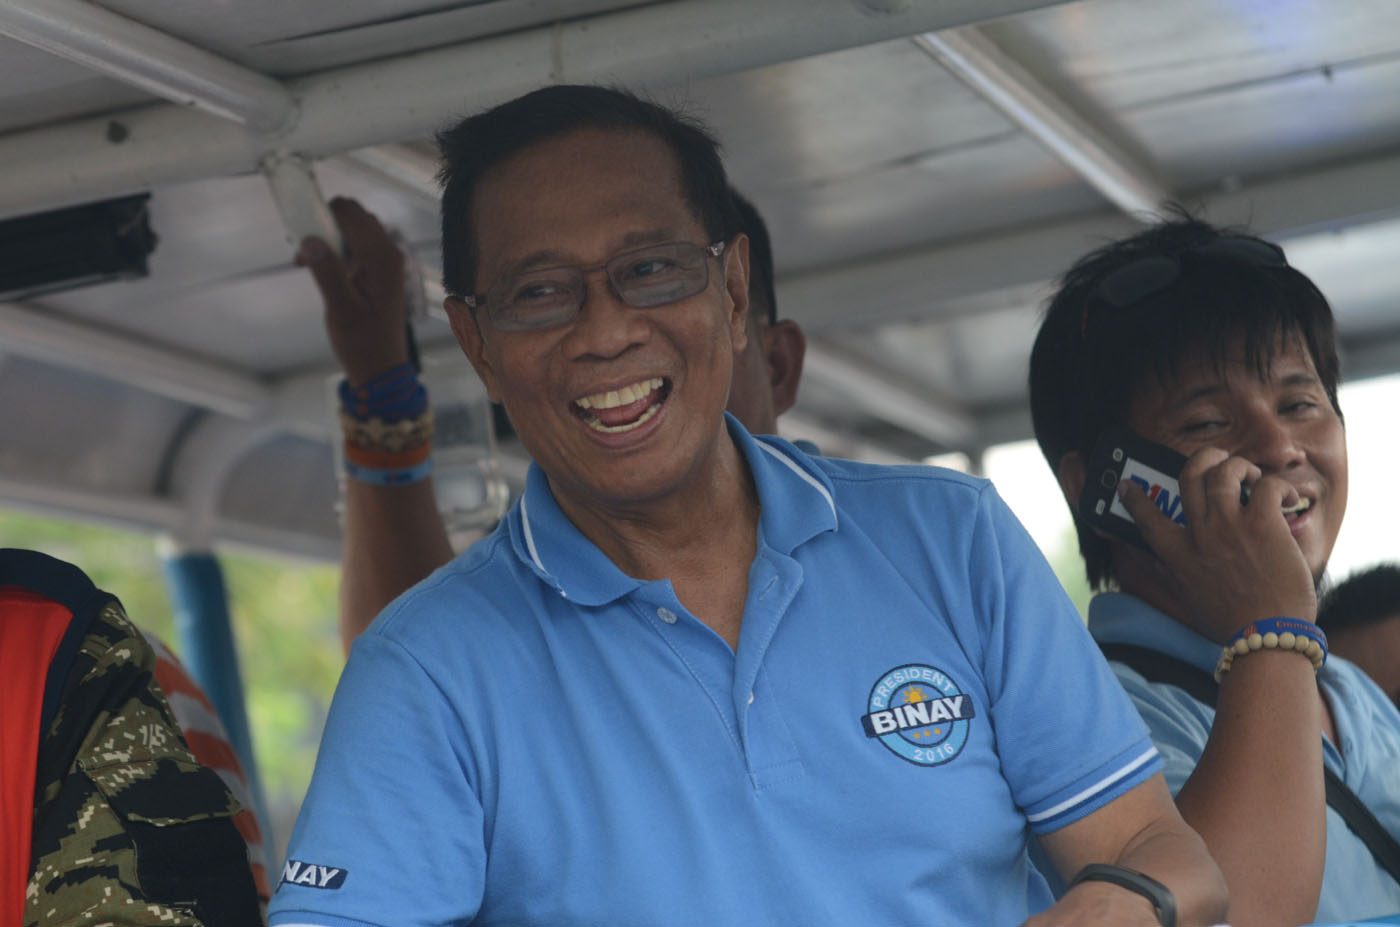 Binay in Western Visayas: ‘I have many silent supporters here’